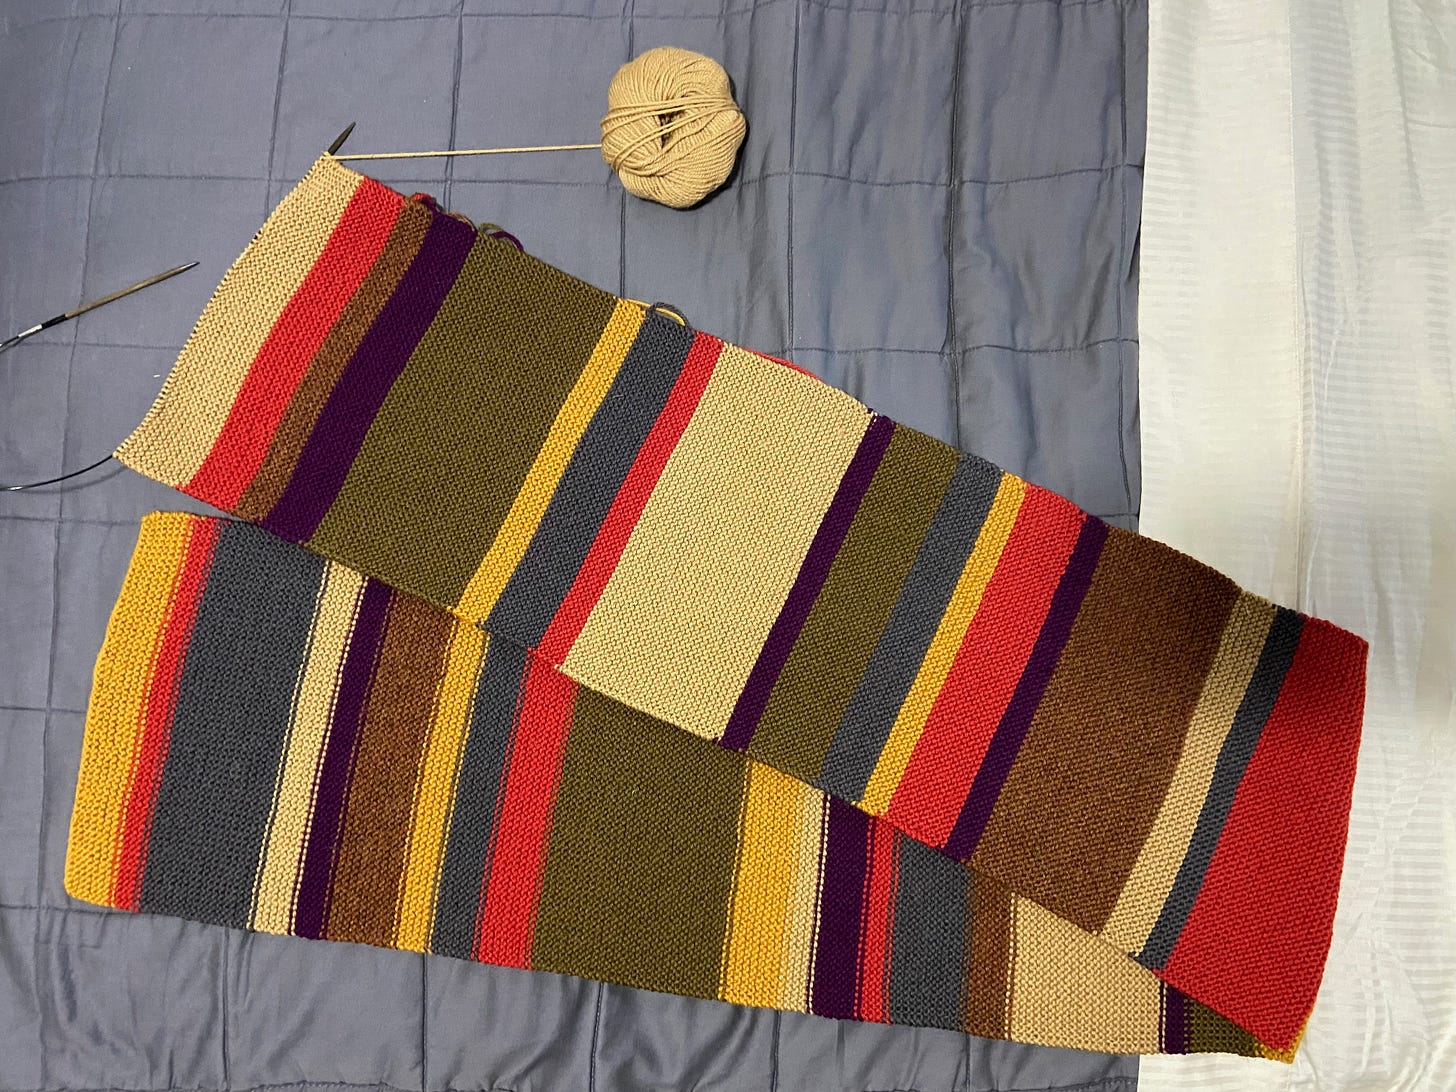 An in-progress DOCTOR WHO scarf displayed on a bed. The most recent color attached to the needles (and with a ball of yarn off to the side) is tan.